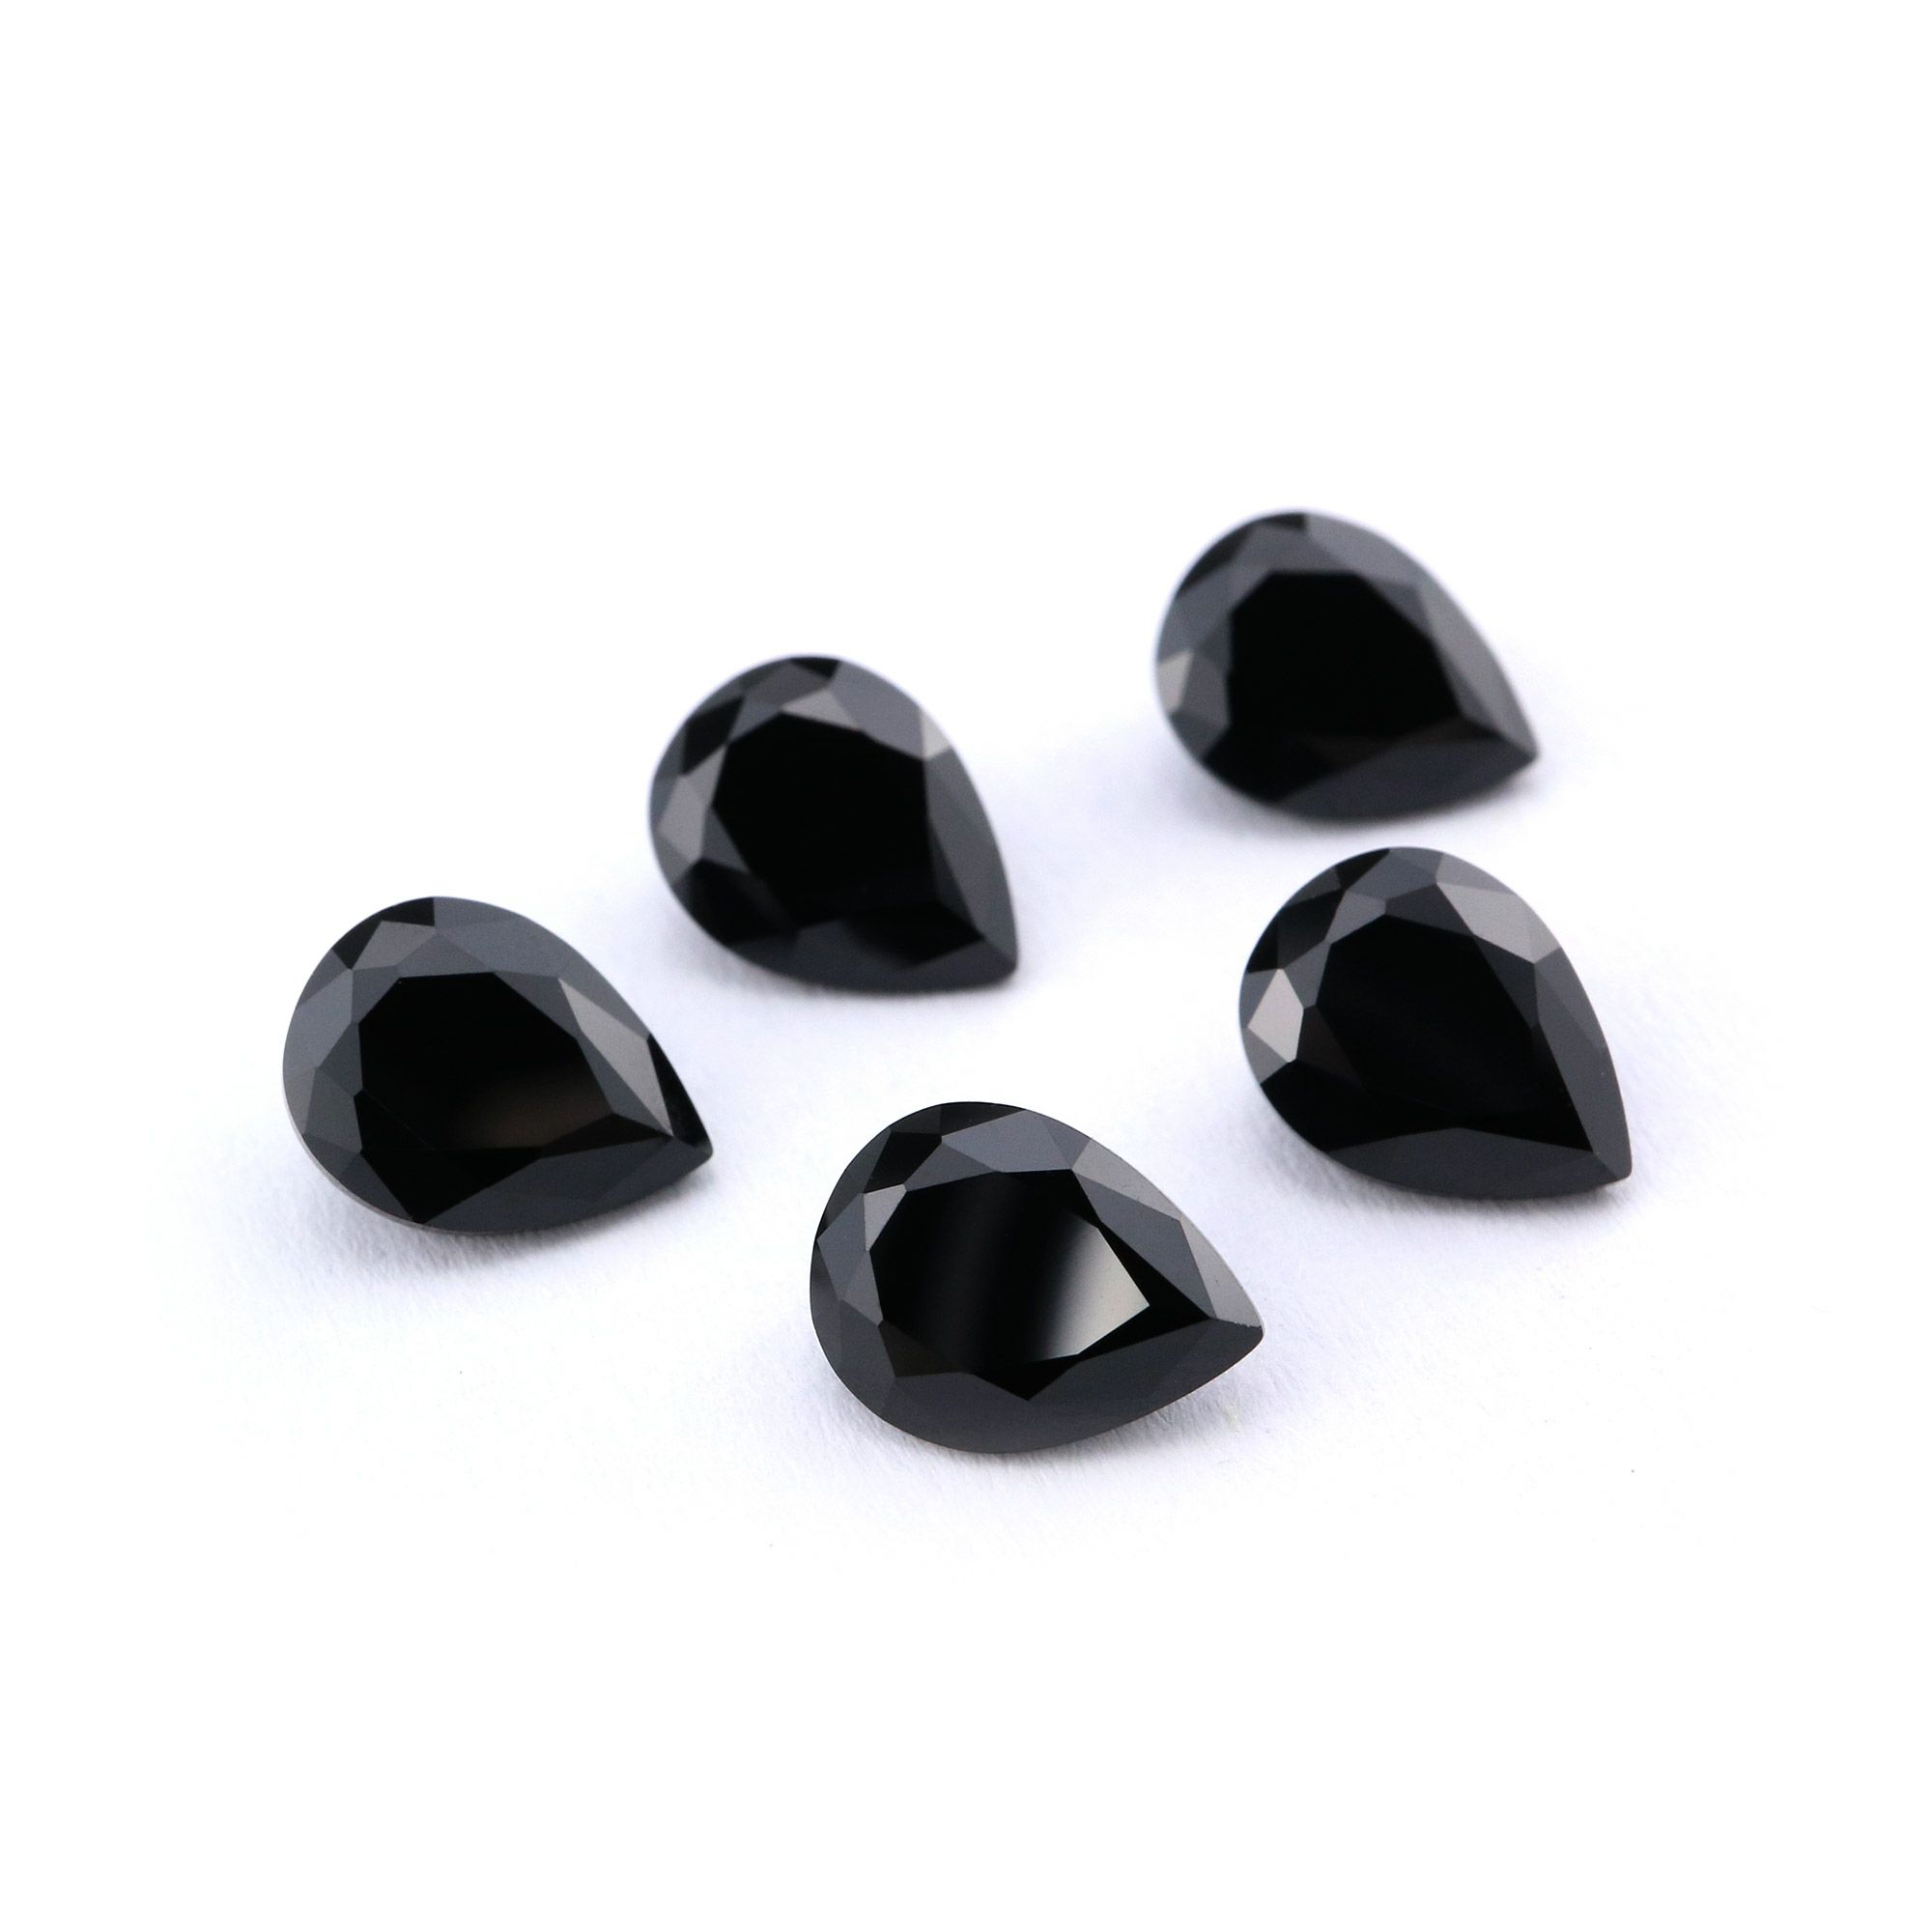 1Pcs Pear Black Spinel Faceted Cut Loose Gemstone Natural Semi Precious Stone DIY Jewelry Supplies 4150007 - Click Image to Close